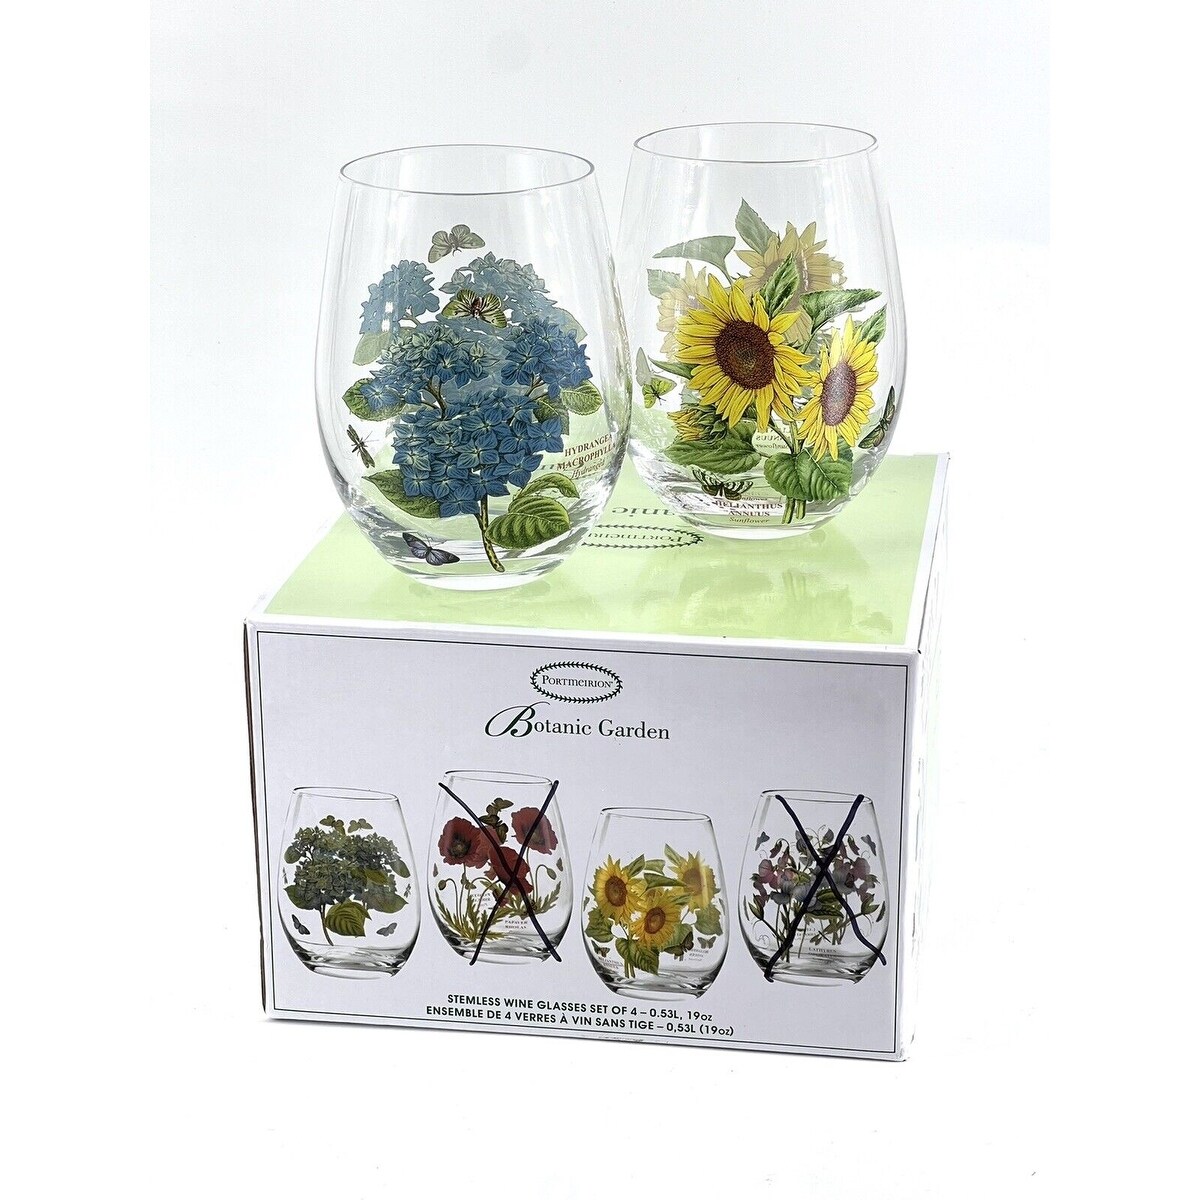 https://ak1.ostkcdn.com/images/products/is/images/direct/c56a8adf398b1441888c9025687a5f0d837c36d6/Portmeirion-Botanic-Garden-Stemless-Wine-Glass-Set-of-4.jpg